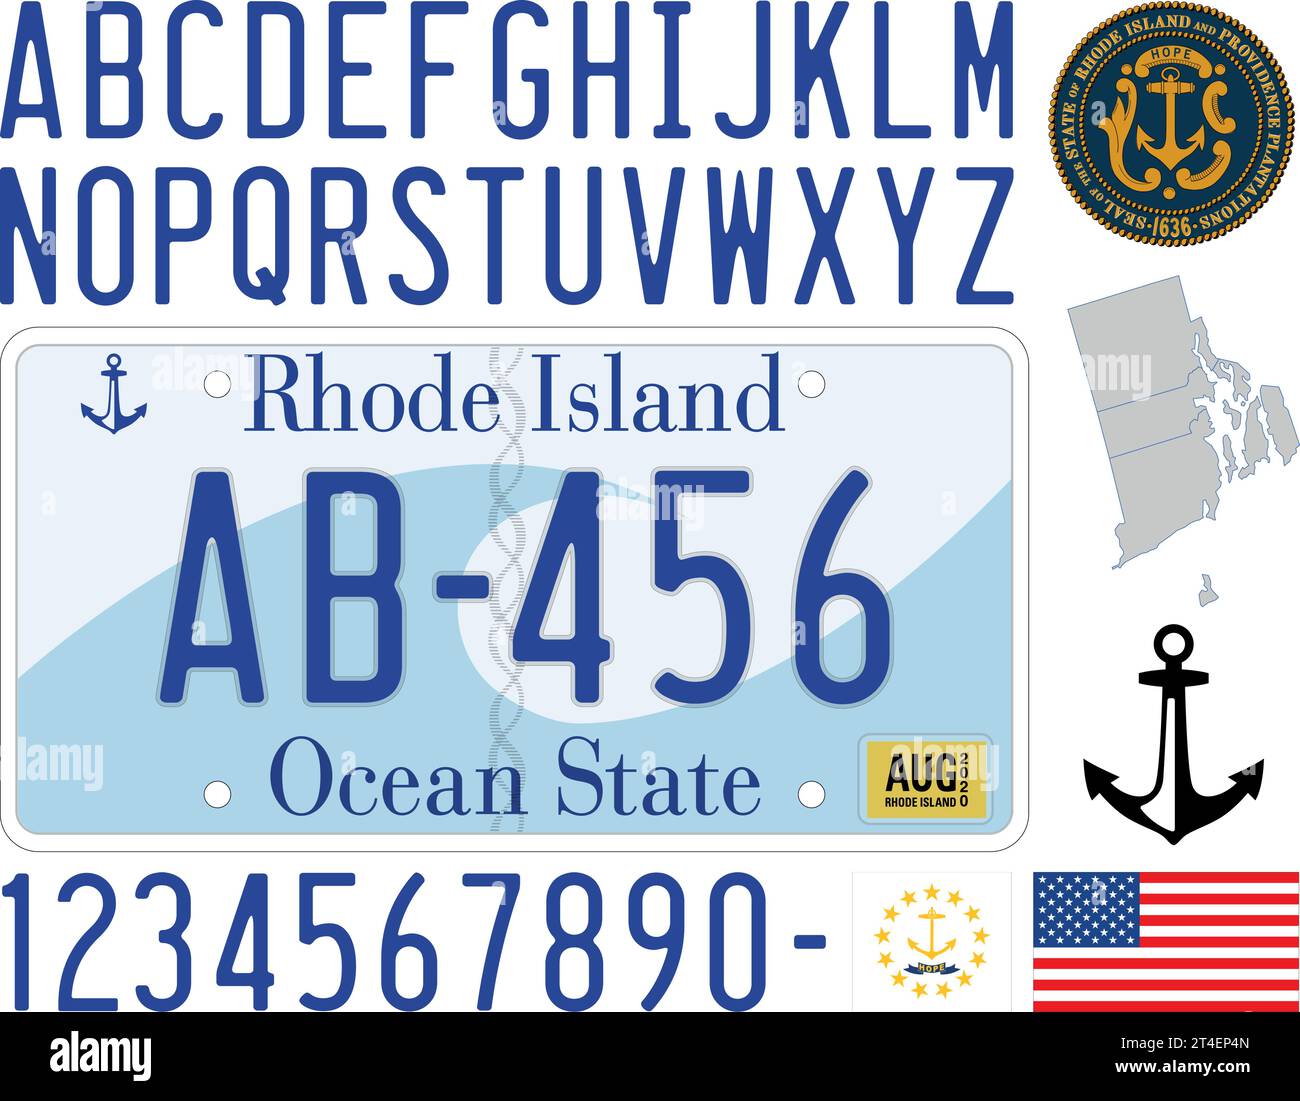 Rhode Island US state car license plate pattern, letters, numbers and symbols, vector illustration, USA Stock Vector